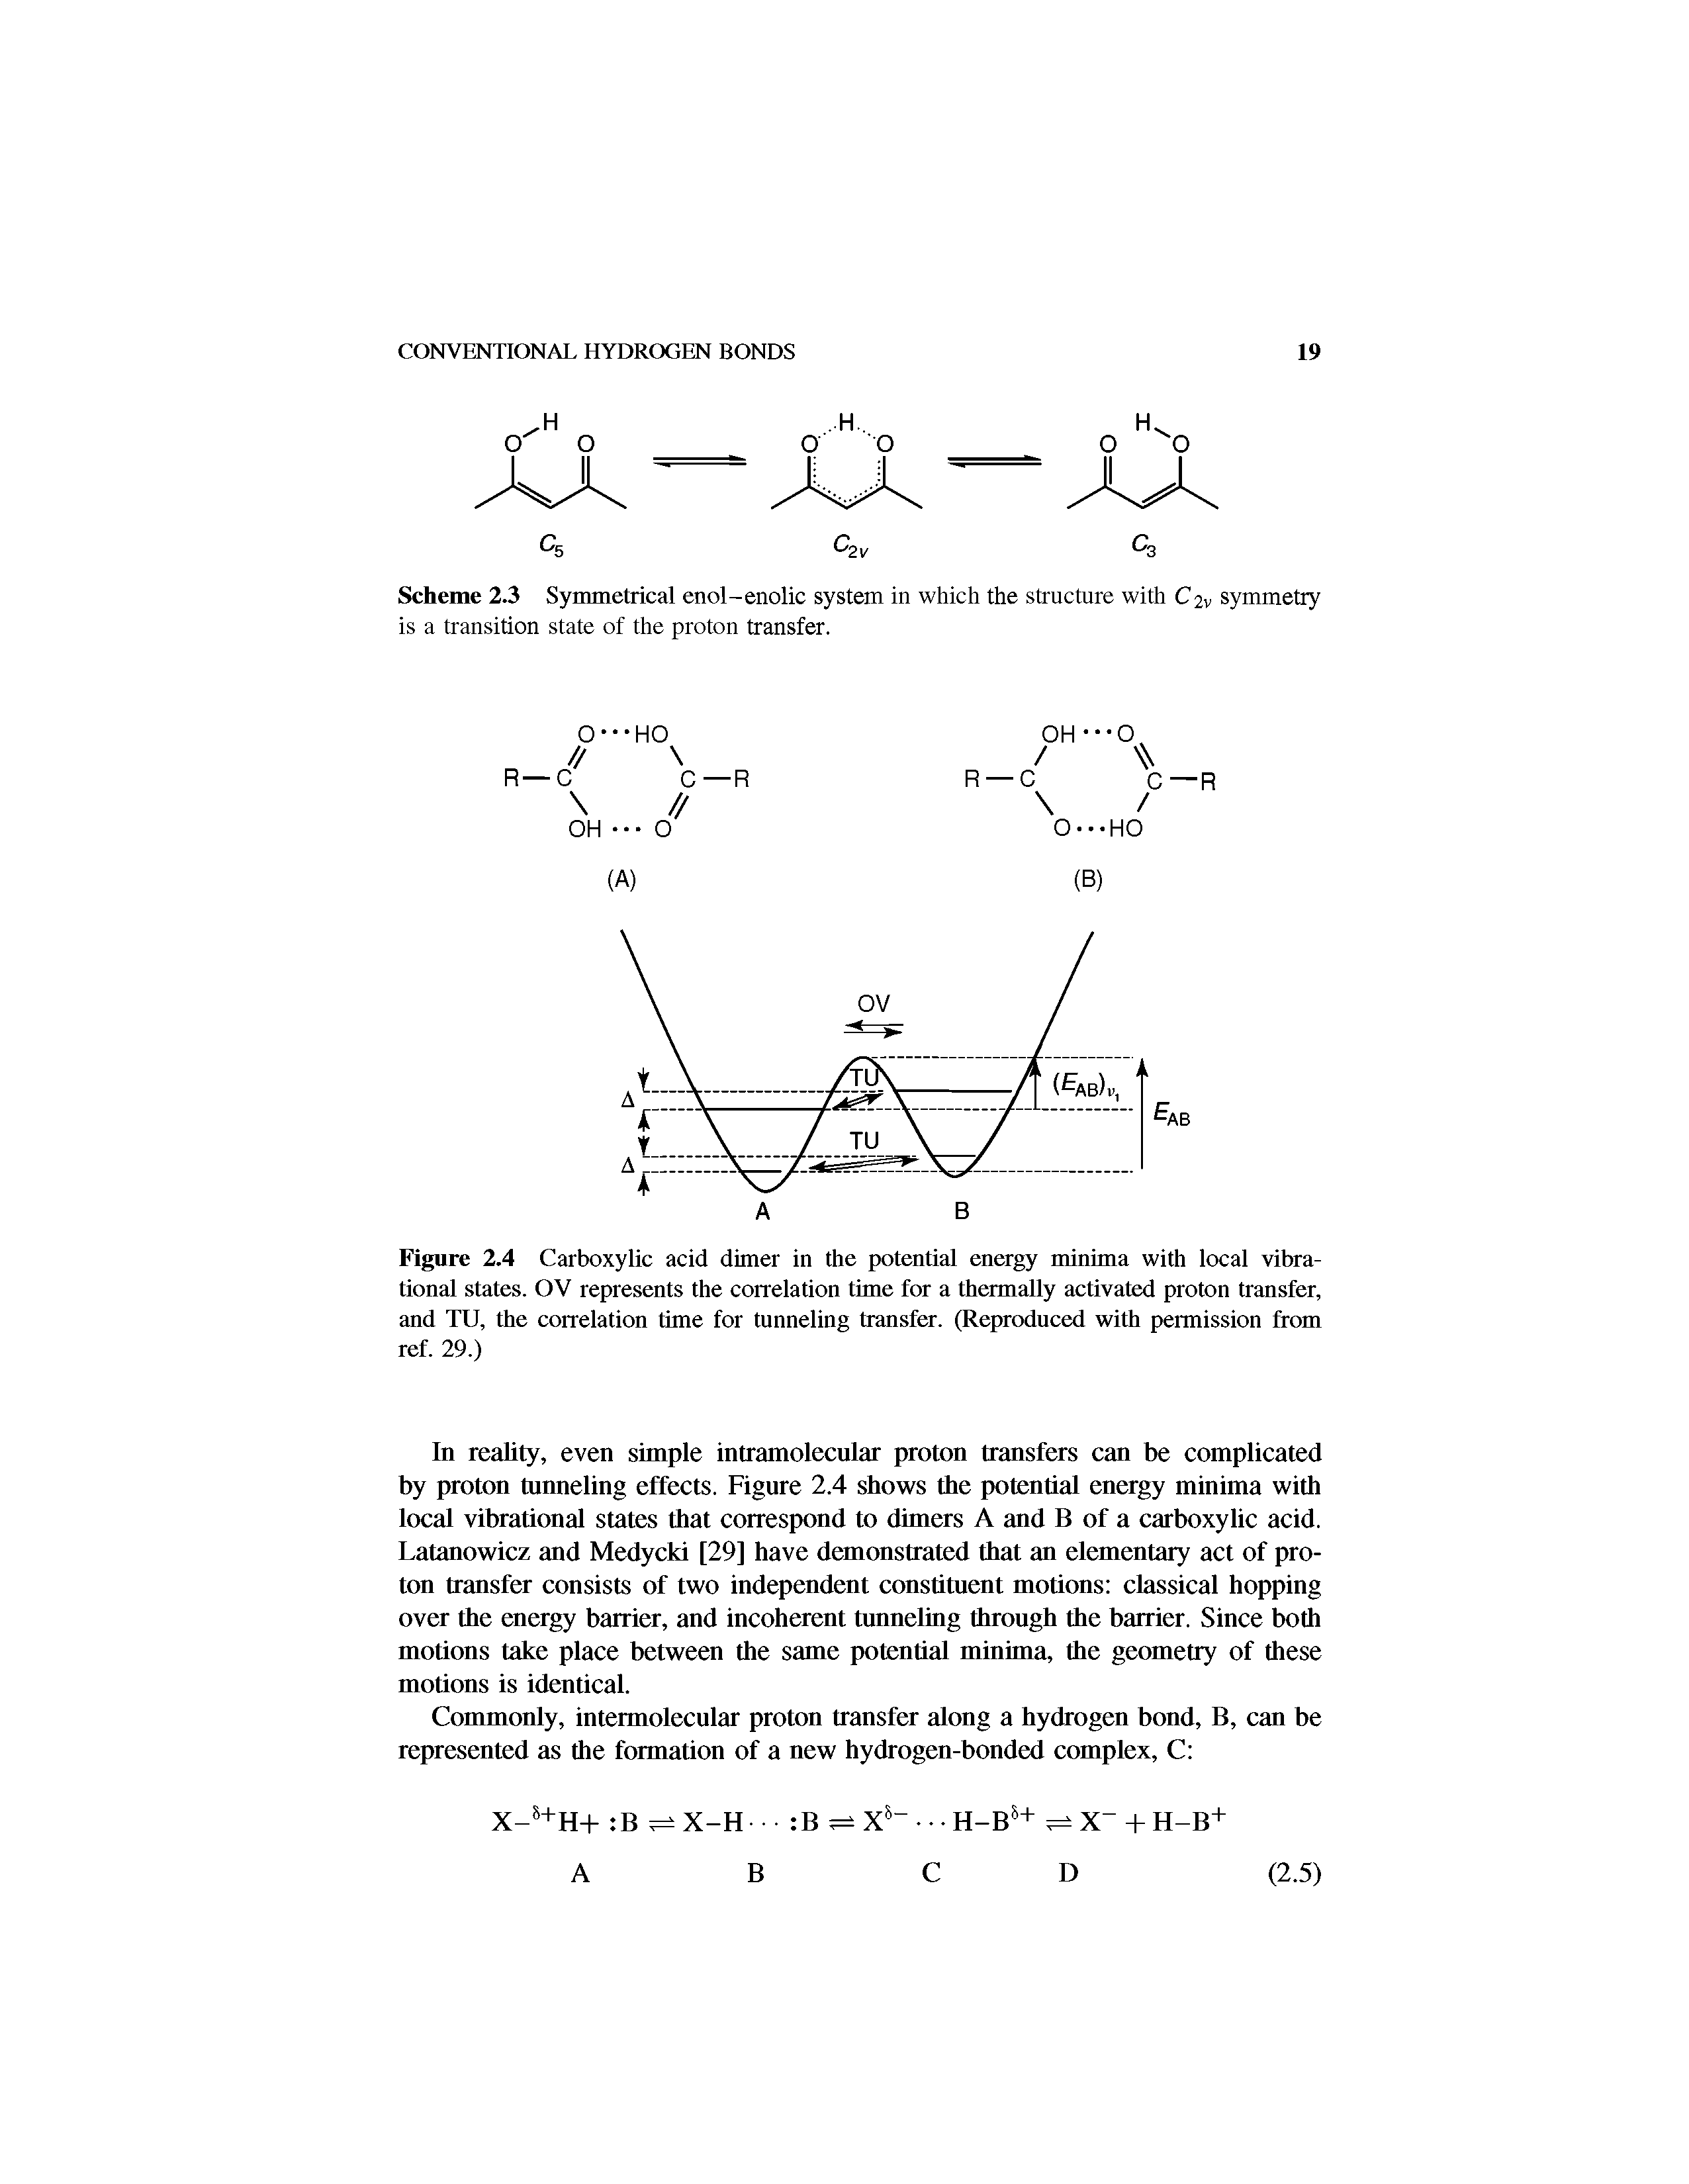 Figure 2.4 Carboxylic acid dimer in the potential energy minima with local vibrational states. OV represents the correlation time for a thermally activated proton transfer, and TU, the correlation time for tunneling transfer. (Reproduced with permission from ref. 29.)...